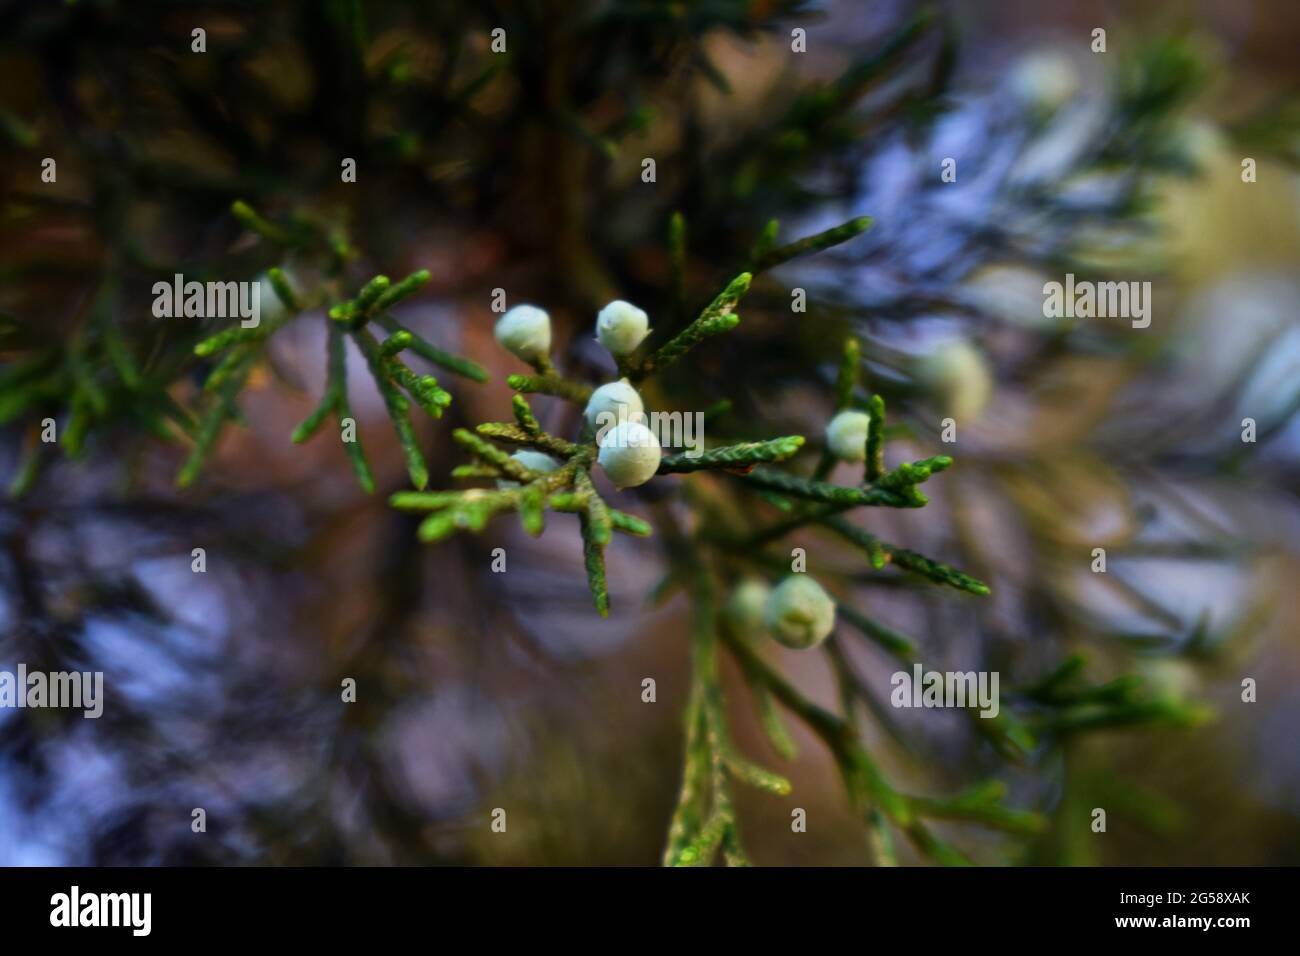 Centered closeup of light blue berries of a juniper species tree with green leaves Stock Photo